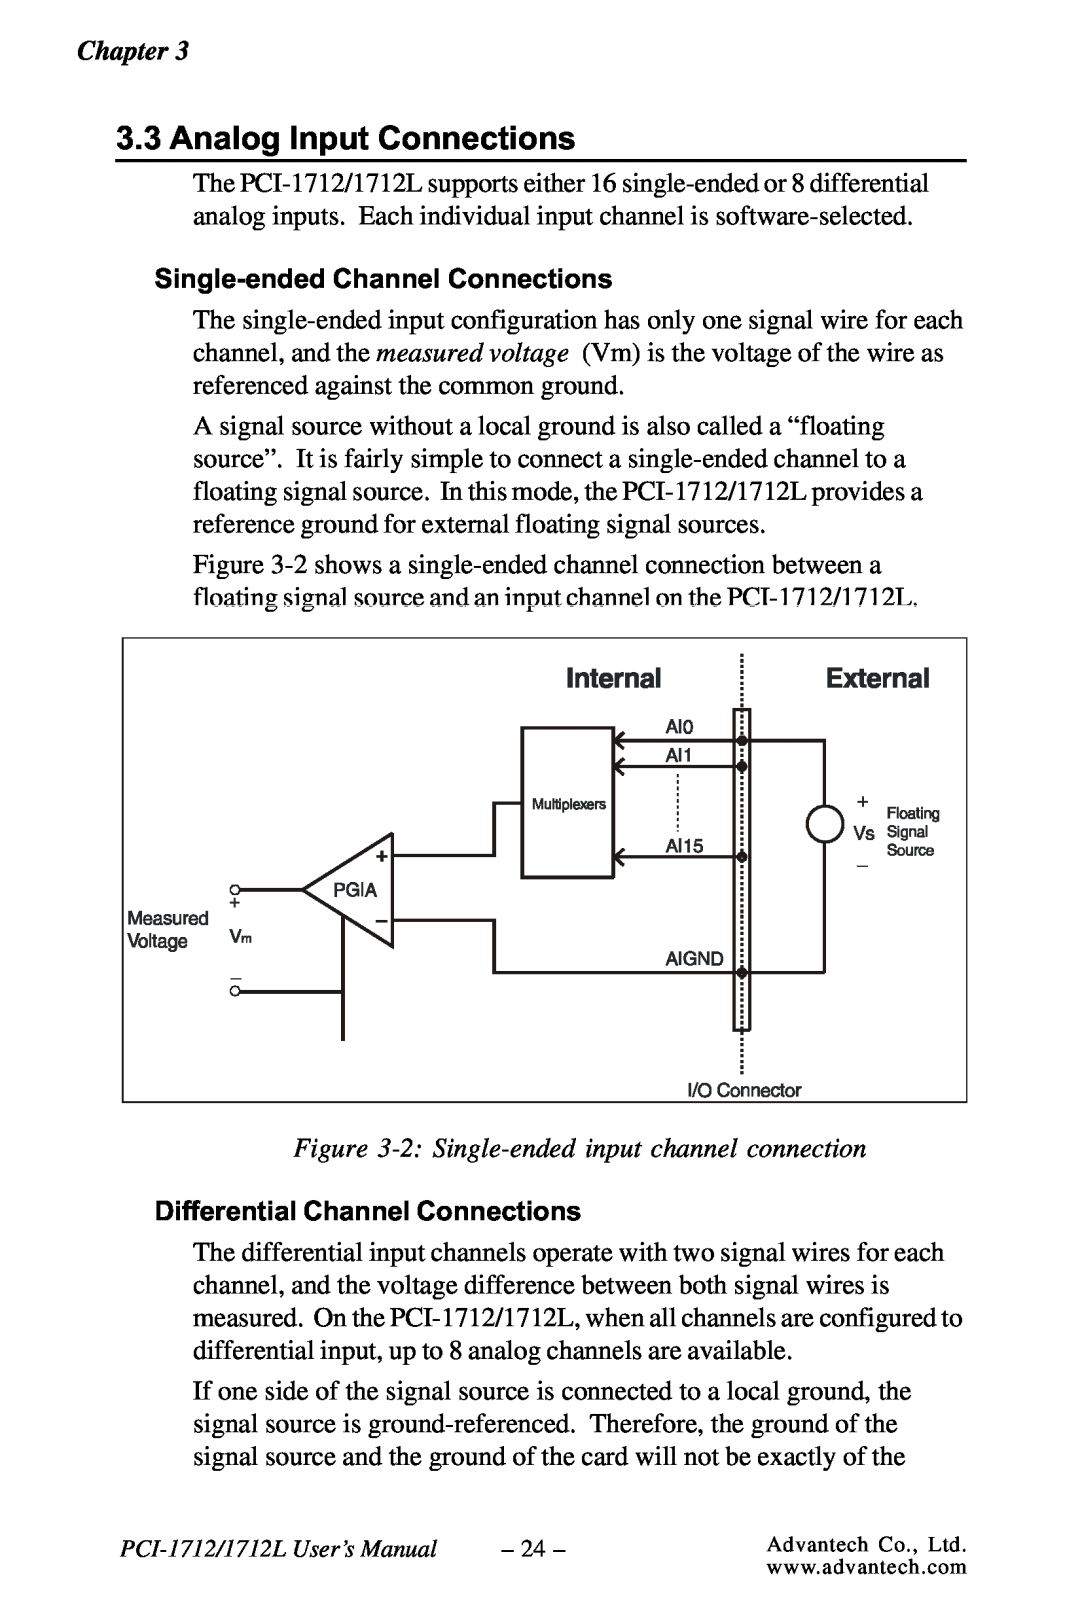 Konica Minolta PCI-1712L user manual Analog Input Connections, 2 Single-ended input channel connection 